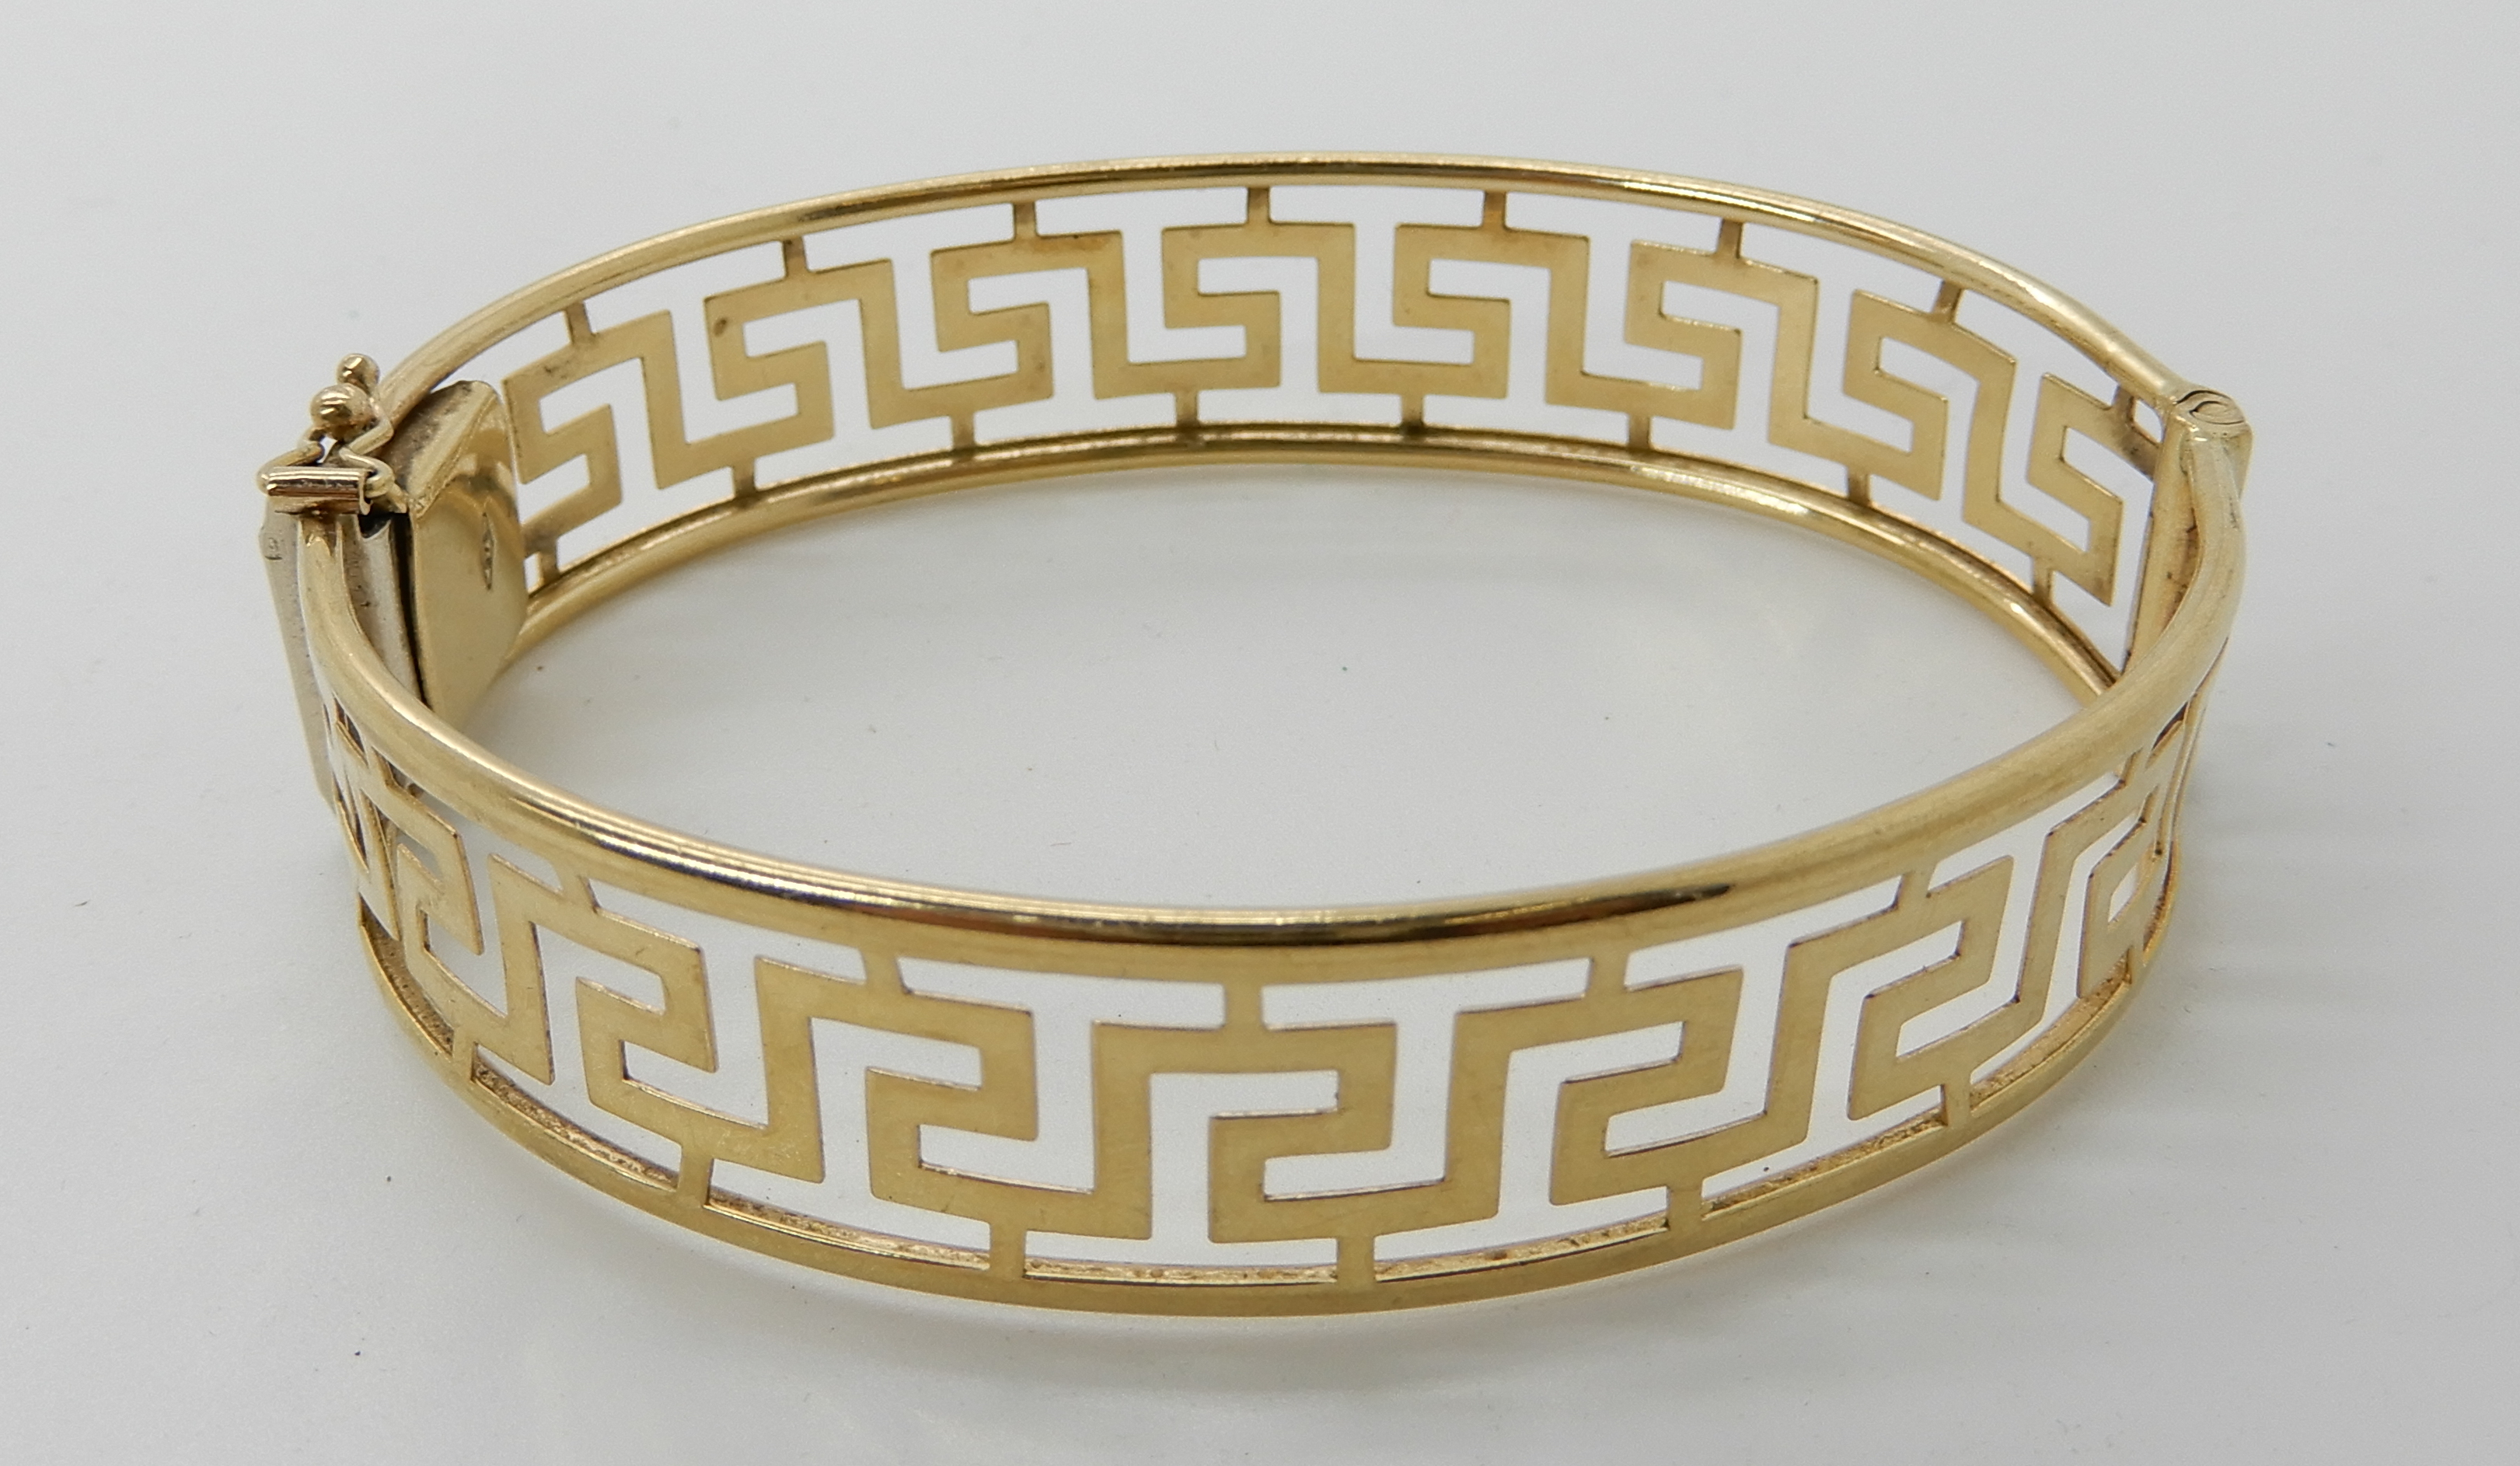 A 9ct gold Greek key pattern bangle, inner dimensions 6.5cm x 5.4cm, weight 14.5gms Condition